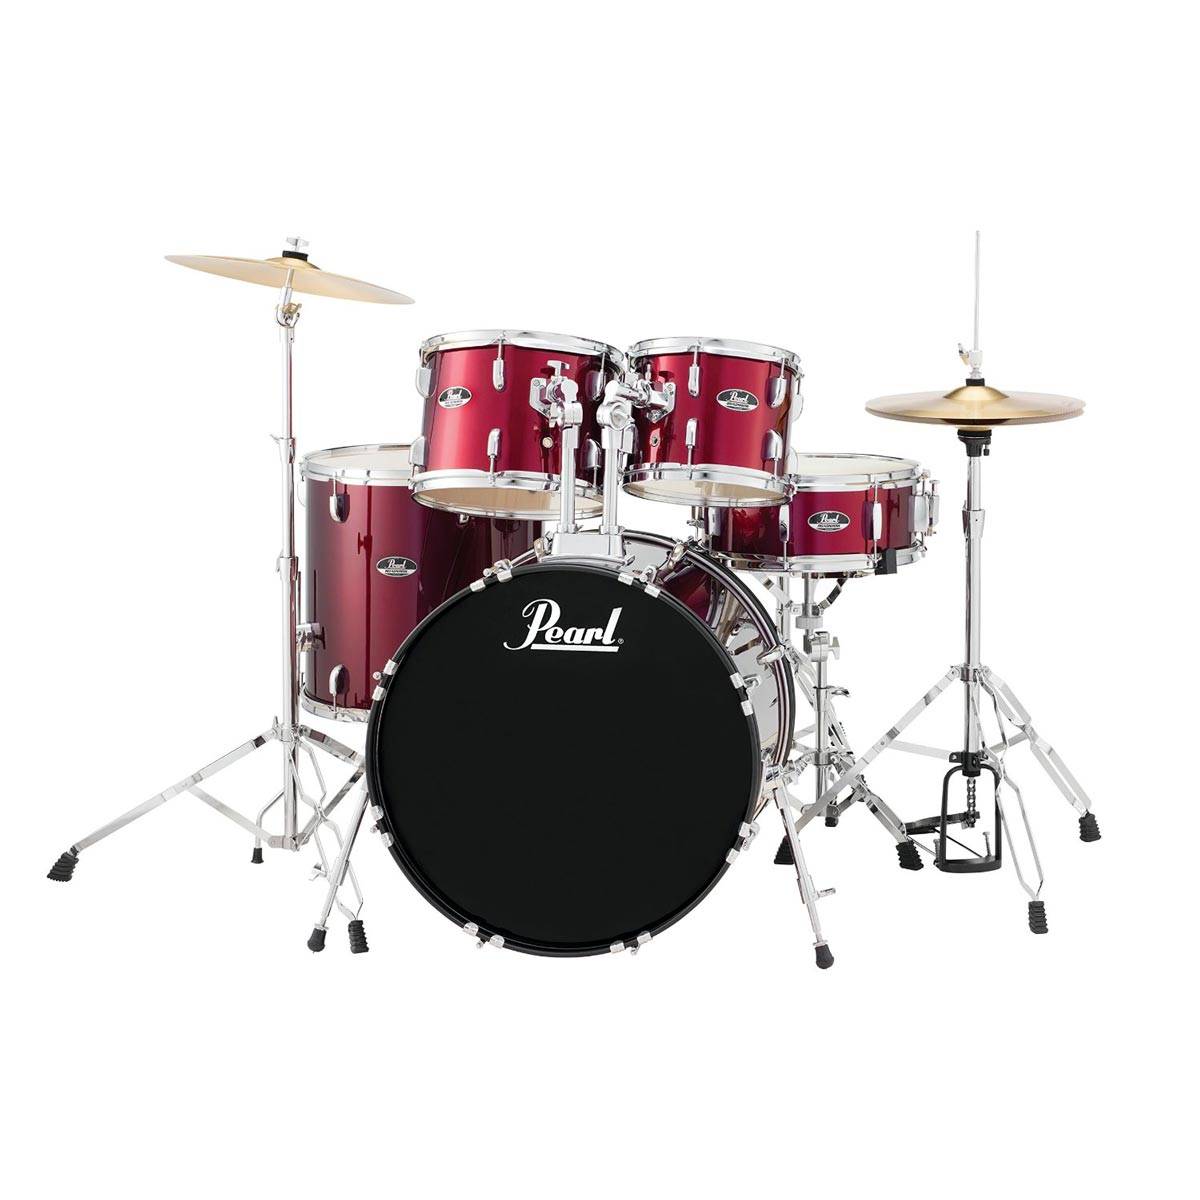 Pearl RS525SC Roadshow Wine Red Drumset & 4 pcs Stands & 2 pcs Sabian Cymbals